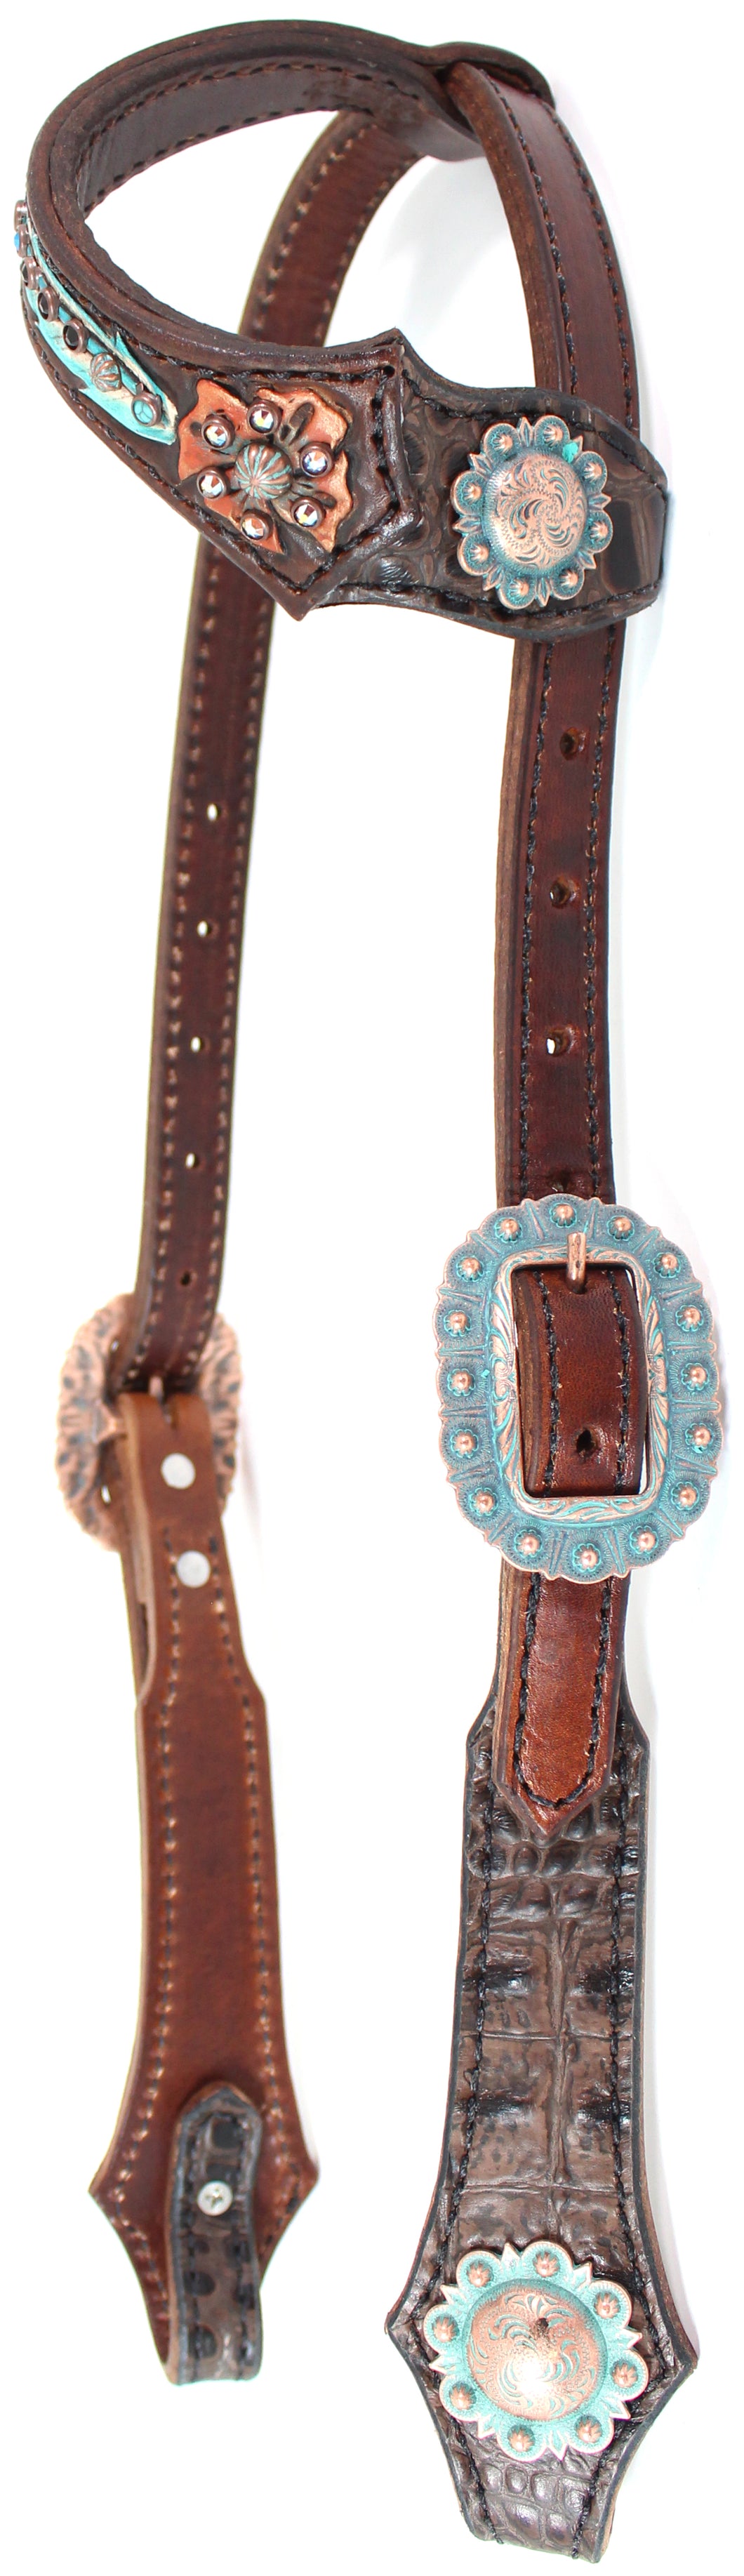 Heritage Brand - Scamper Double Sliding-Ear Headstall